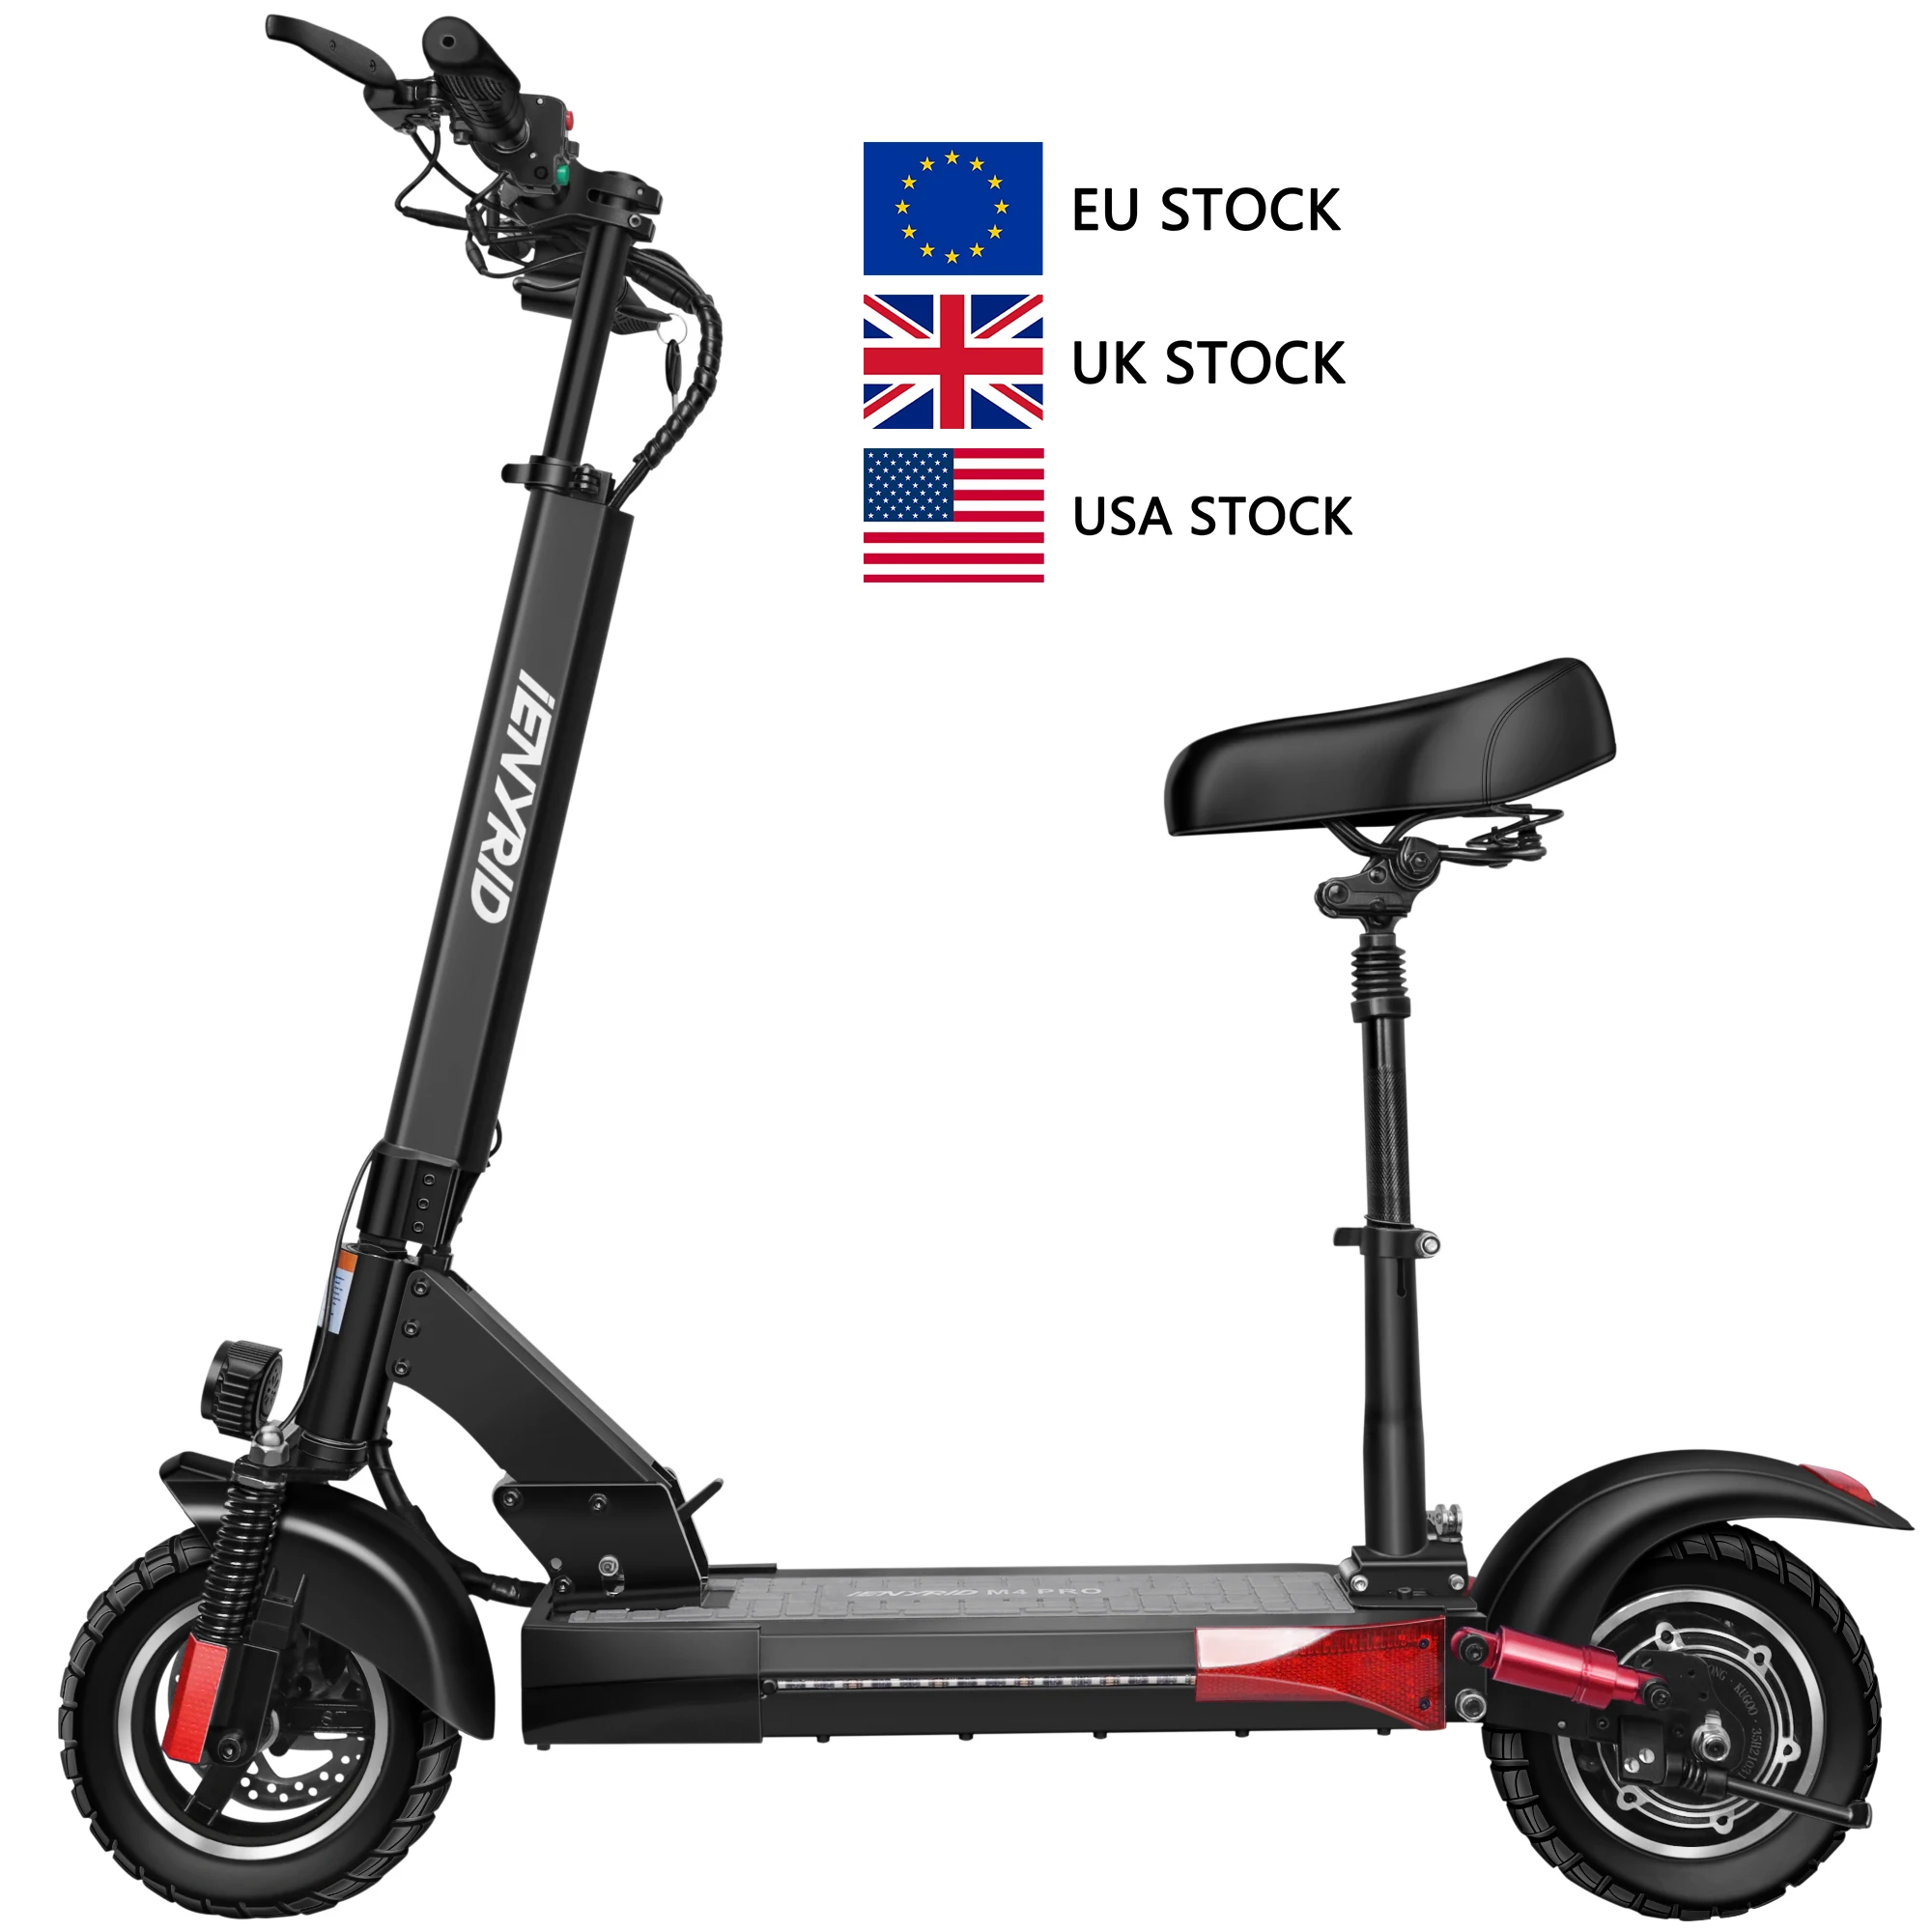 

2021 Newest model UK USA EU iENYRID M4 Pro 500w electric power scooter 10inch Two Wheel Foldable Adult Electric Scooter